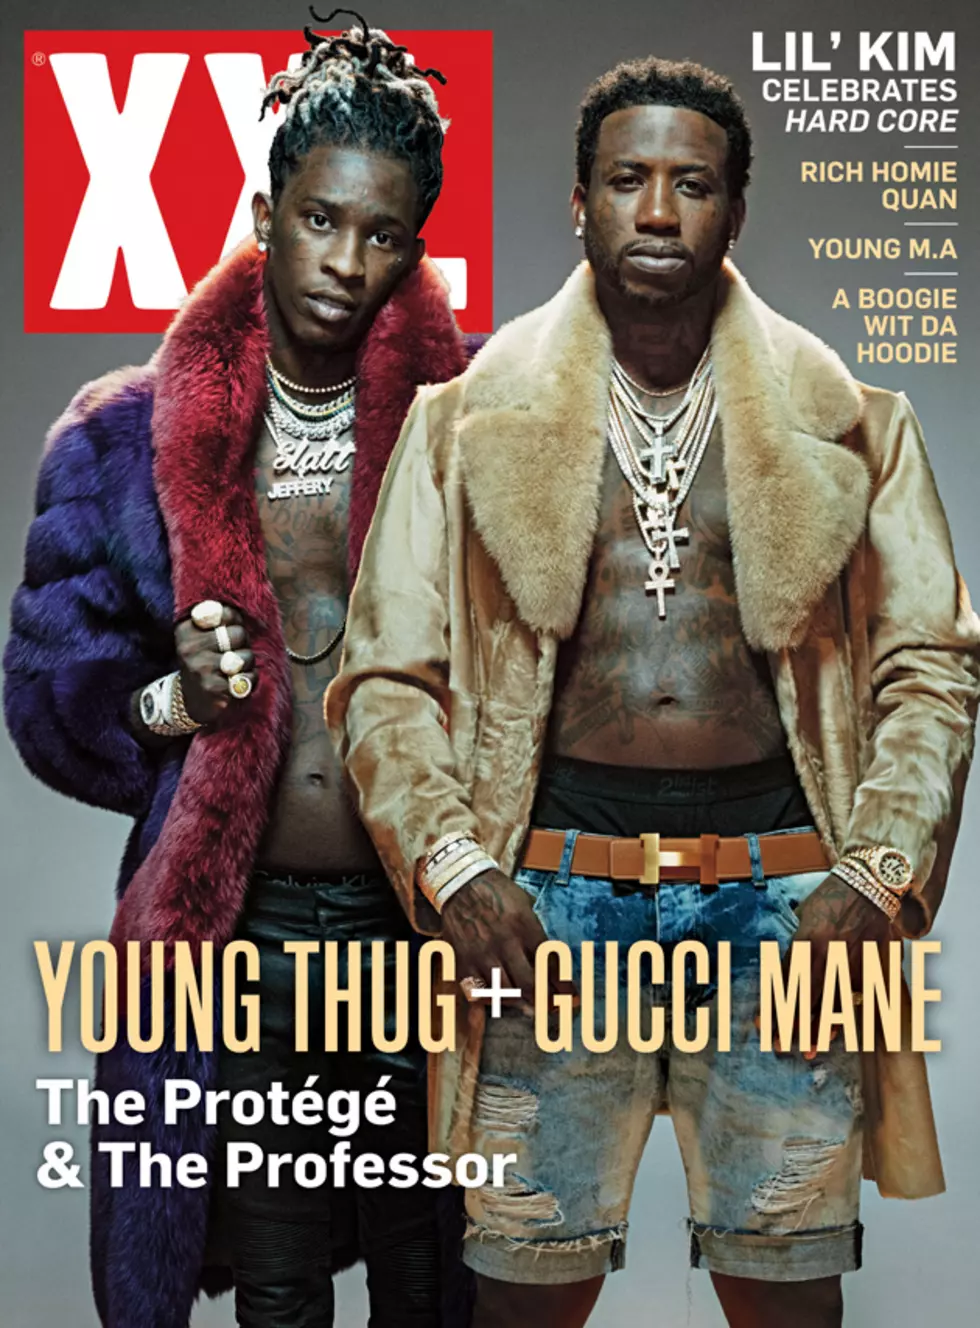 Gucci Mane and Young Thug Cover XXL Magazine's Fall 2016 Issue - XXL